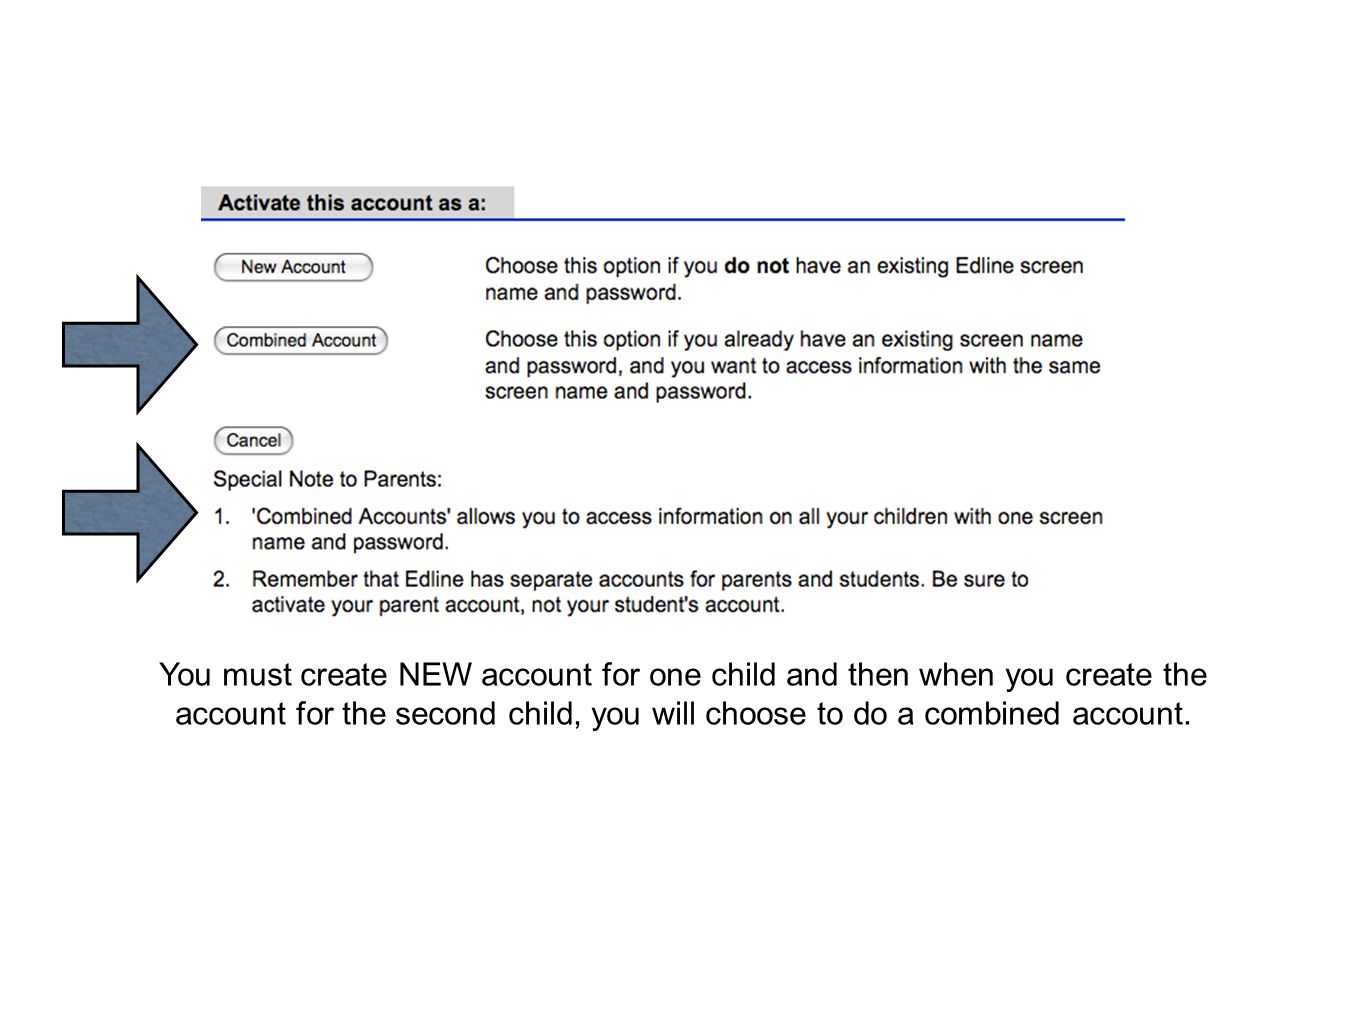 You must create NEW account for one child and then when you create the account for the second child, you will choose to do a combined account.